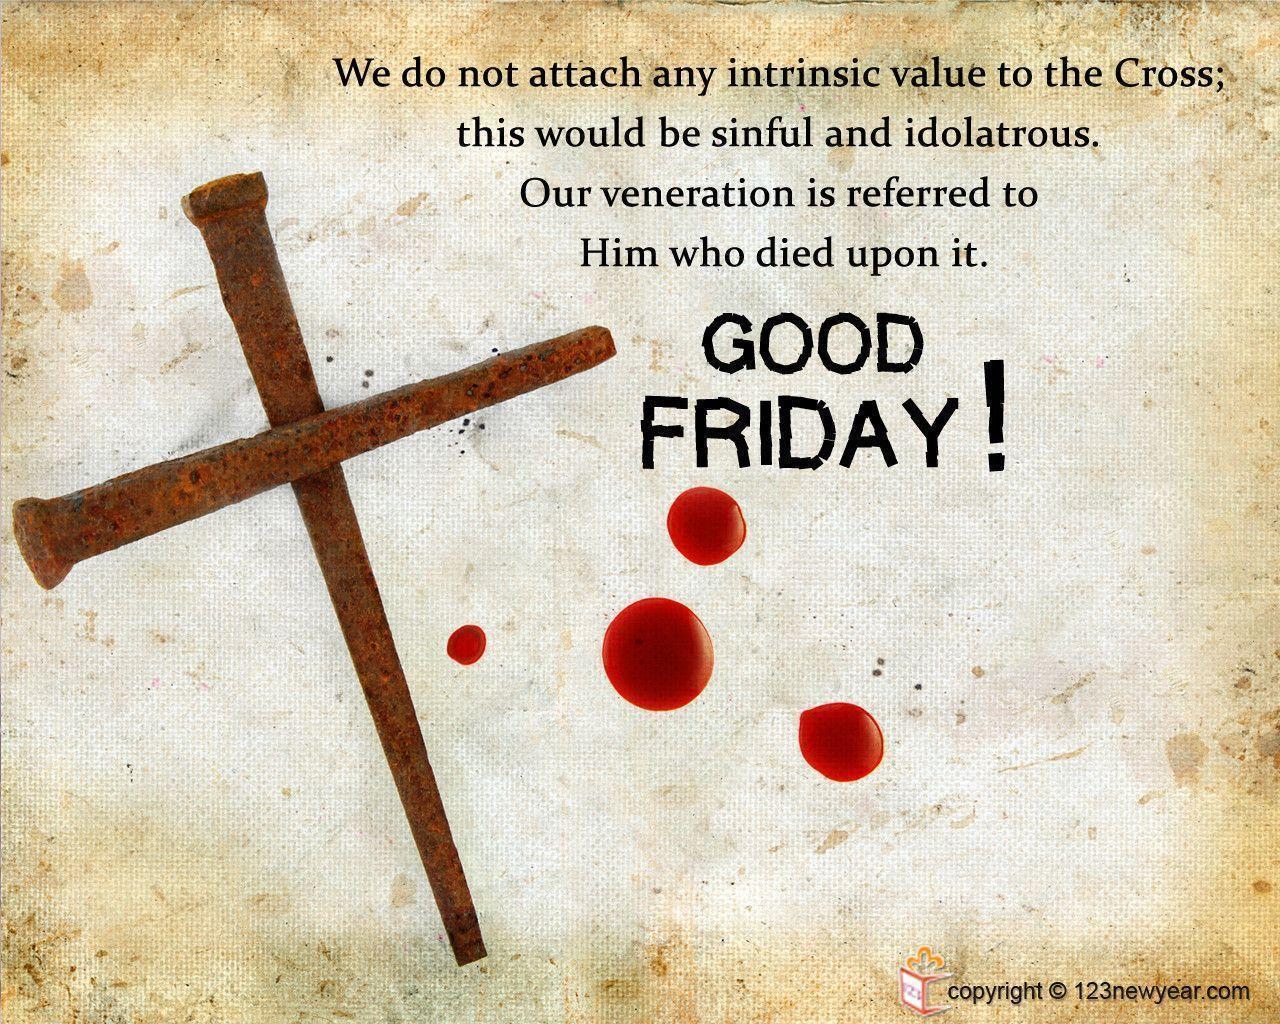 what is the meaning of good friday